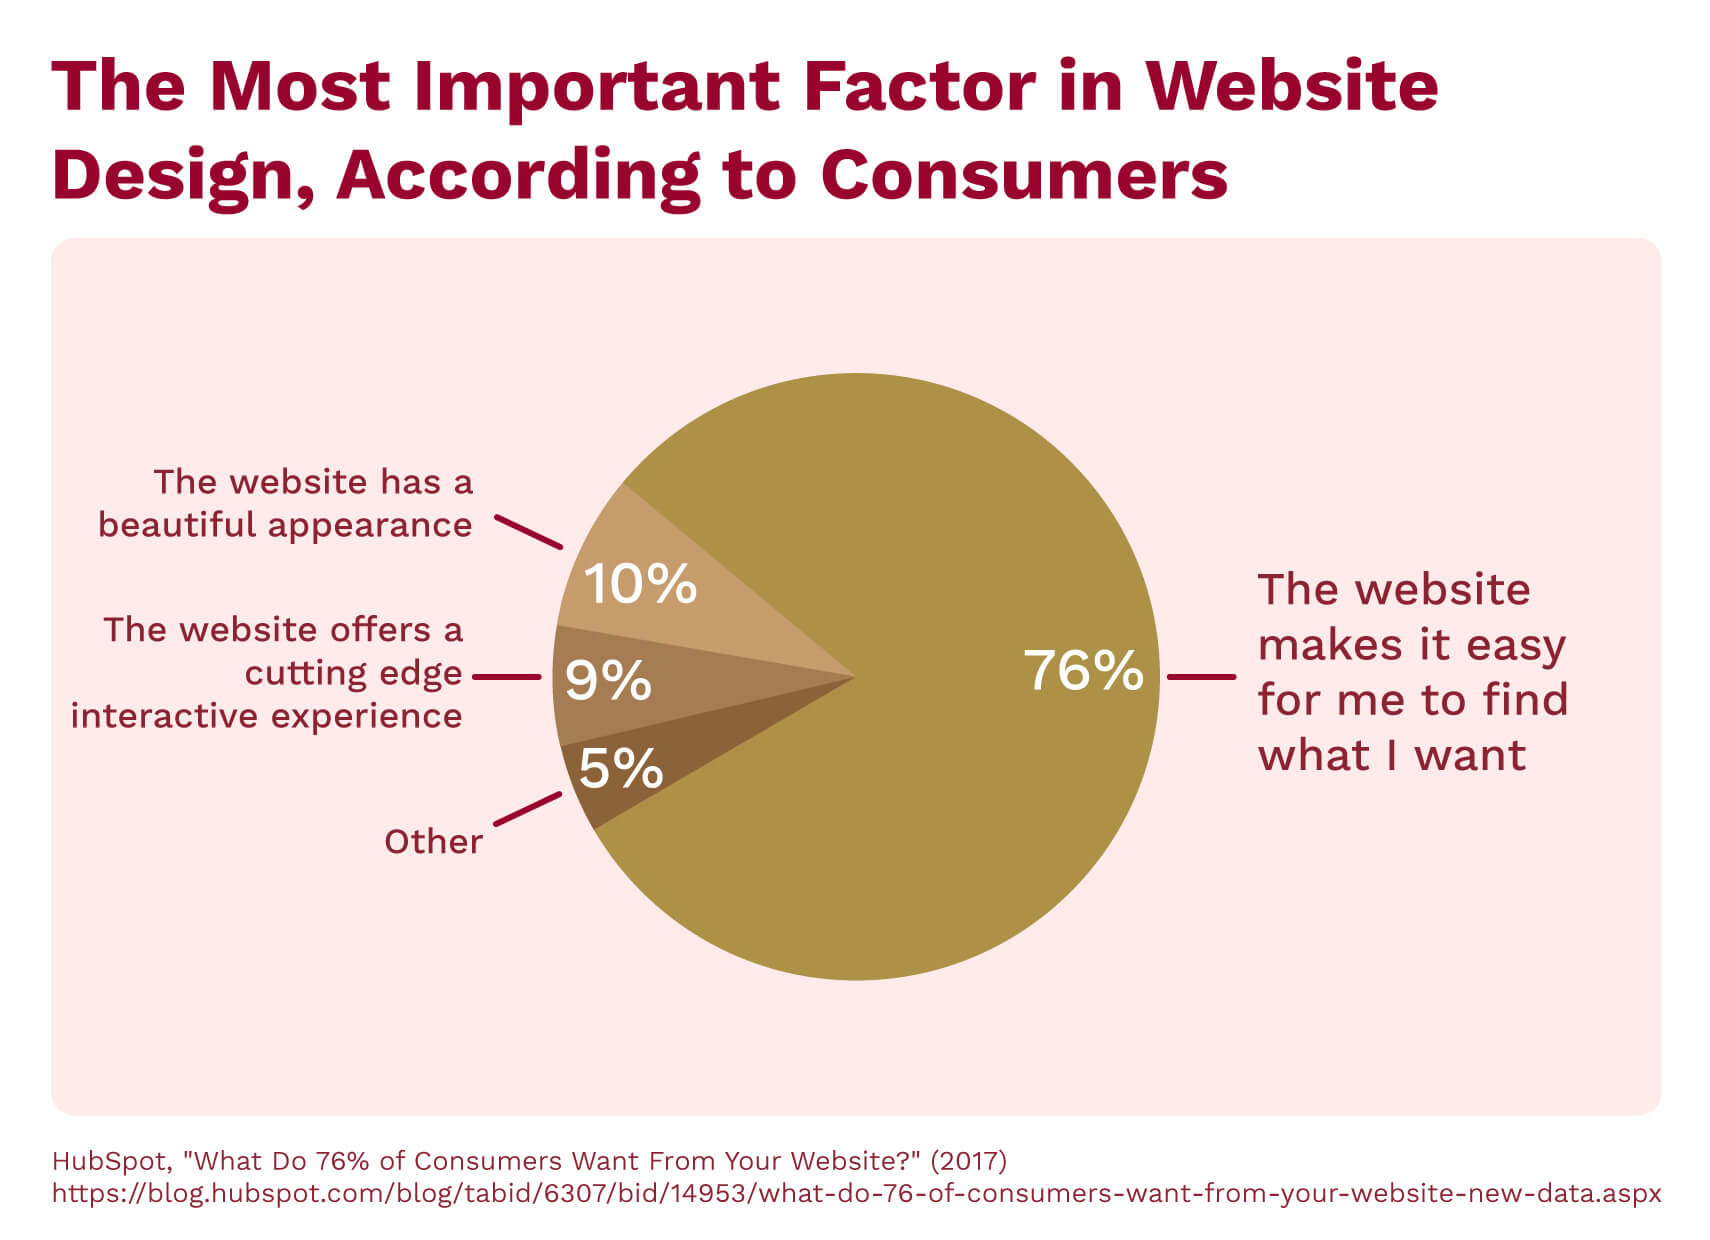 A chart showing the most important factors in website design, according to consumers